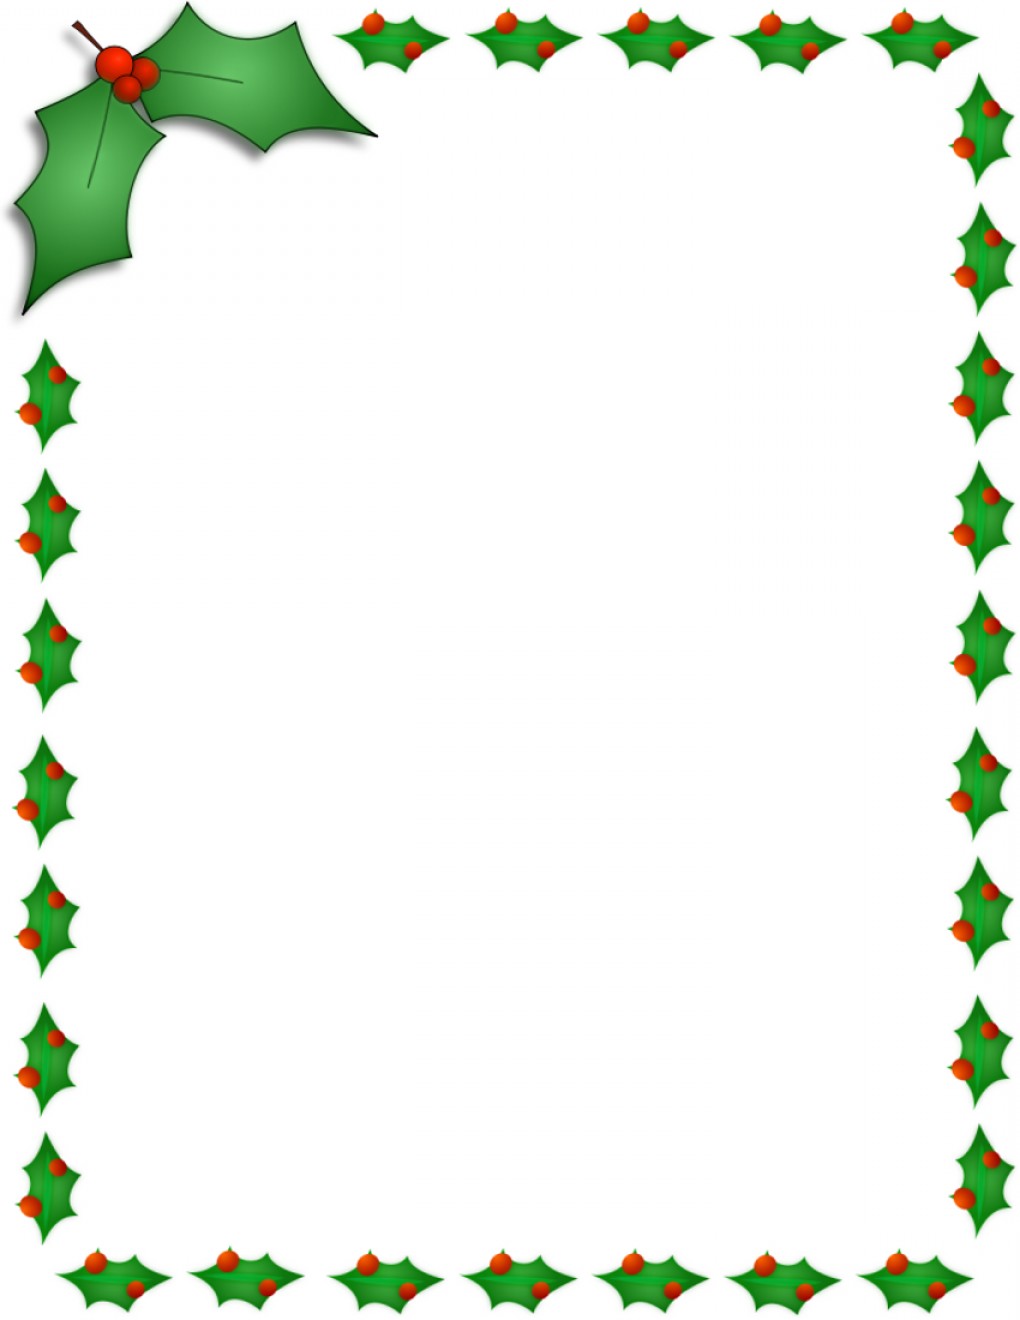 free clipart borders for word documents - photo #26